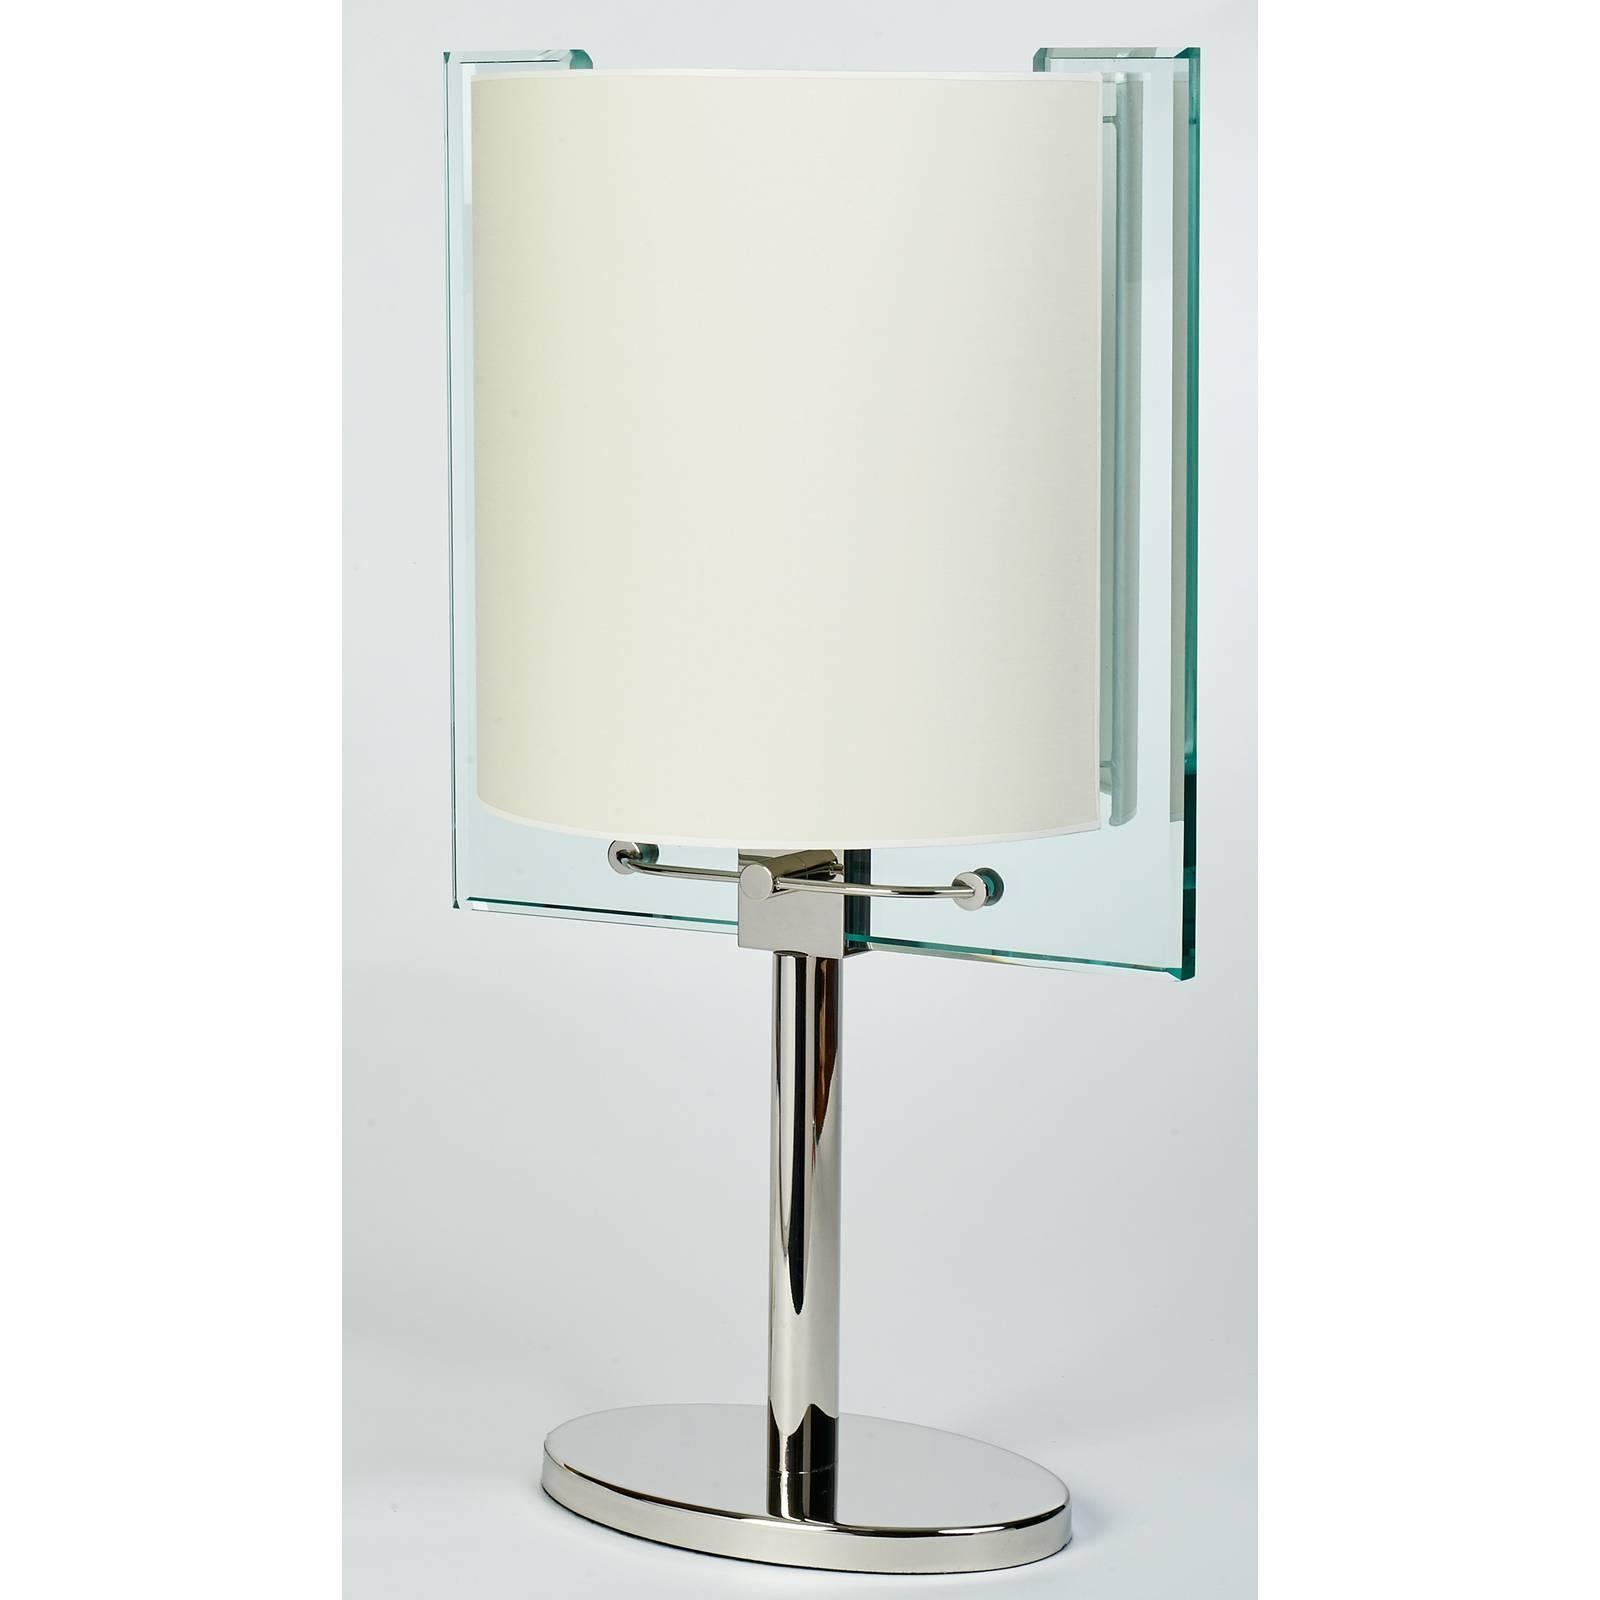 Nathalie Grenon for Fontana Arte
An important Fontana Arte table lamp, designed by Nathalie Grenon,
in glass and polished nickel. 
Italy, circa 1990
Dimensions: 24 H x 13.5 W x 10 D
Rewired for use in the USA with four candelabra base bulbs
 